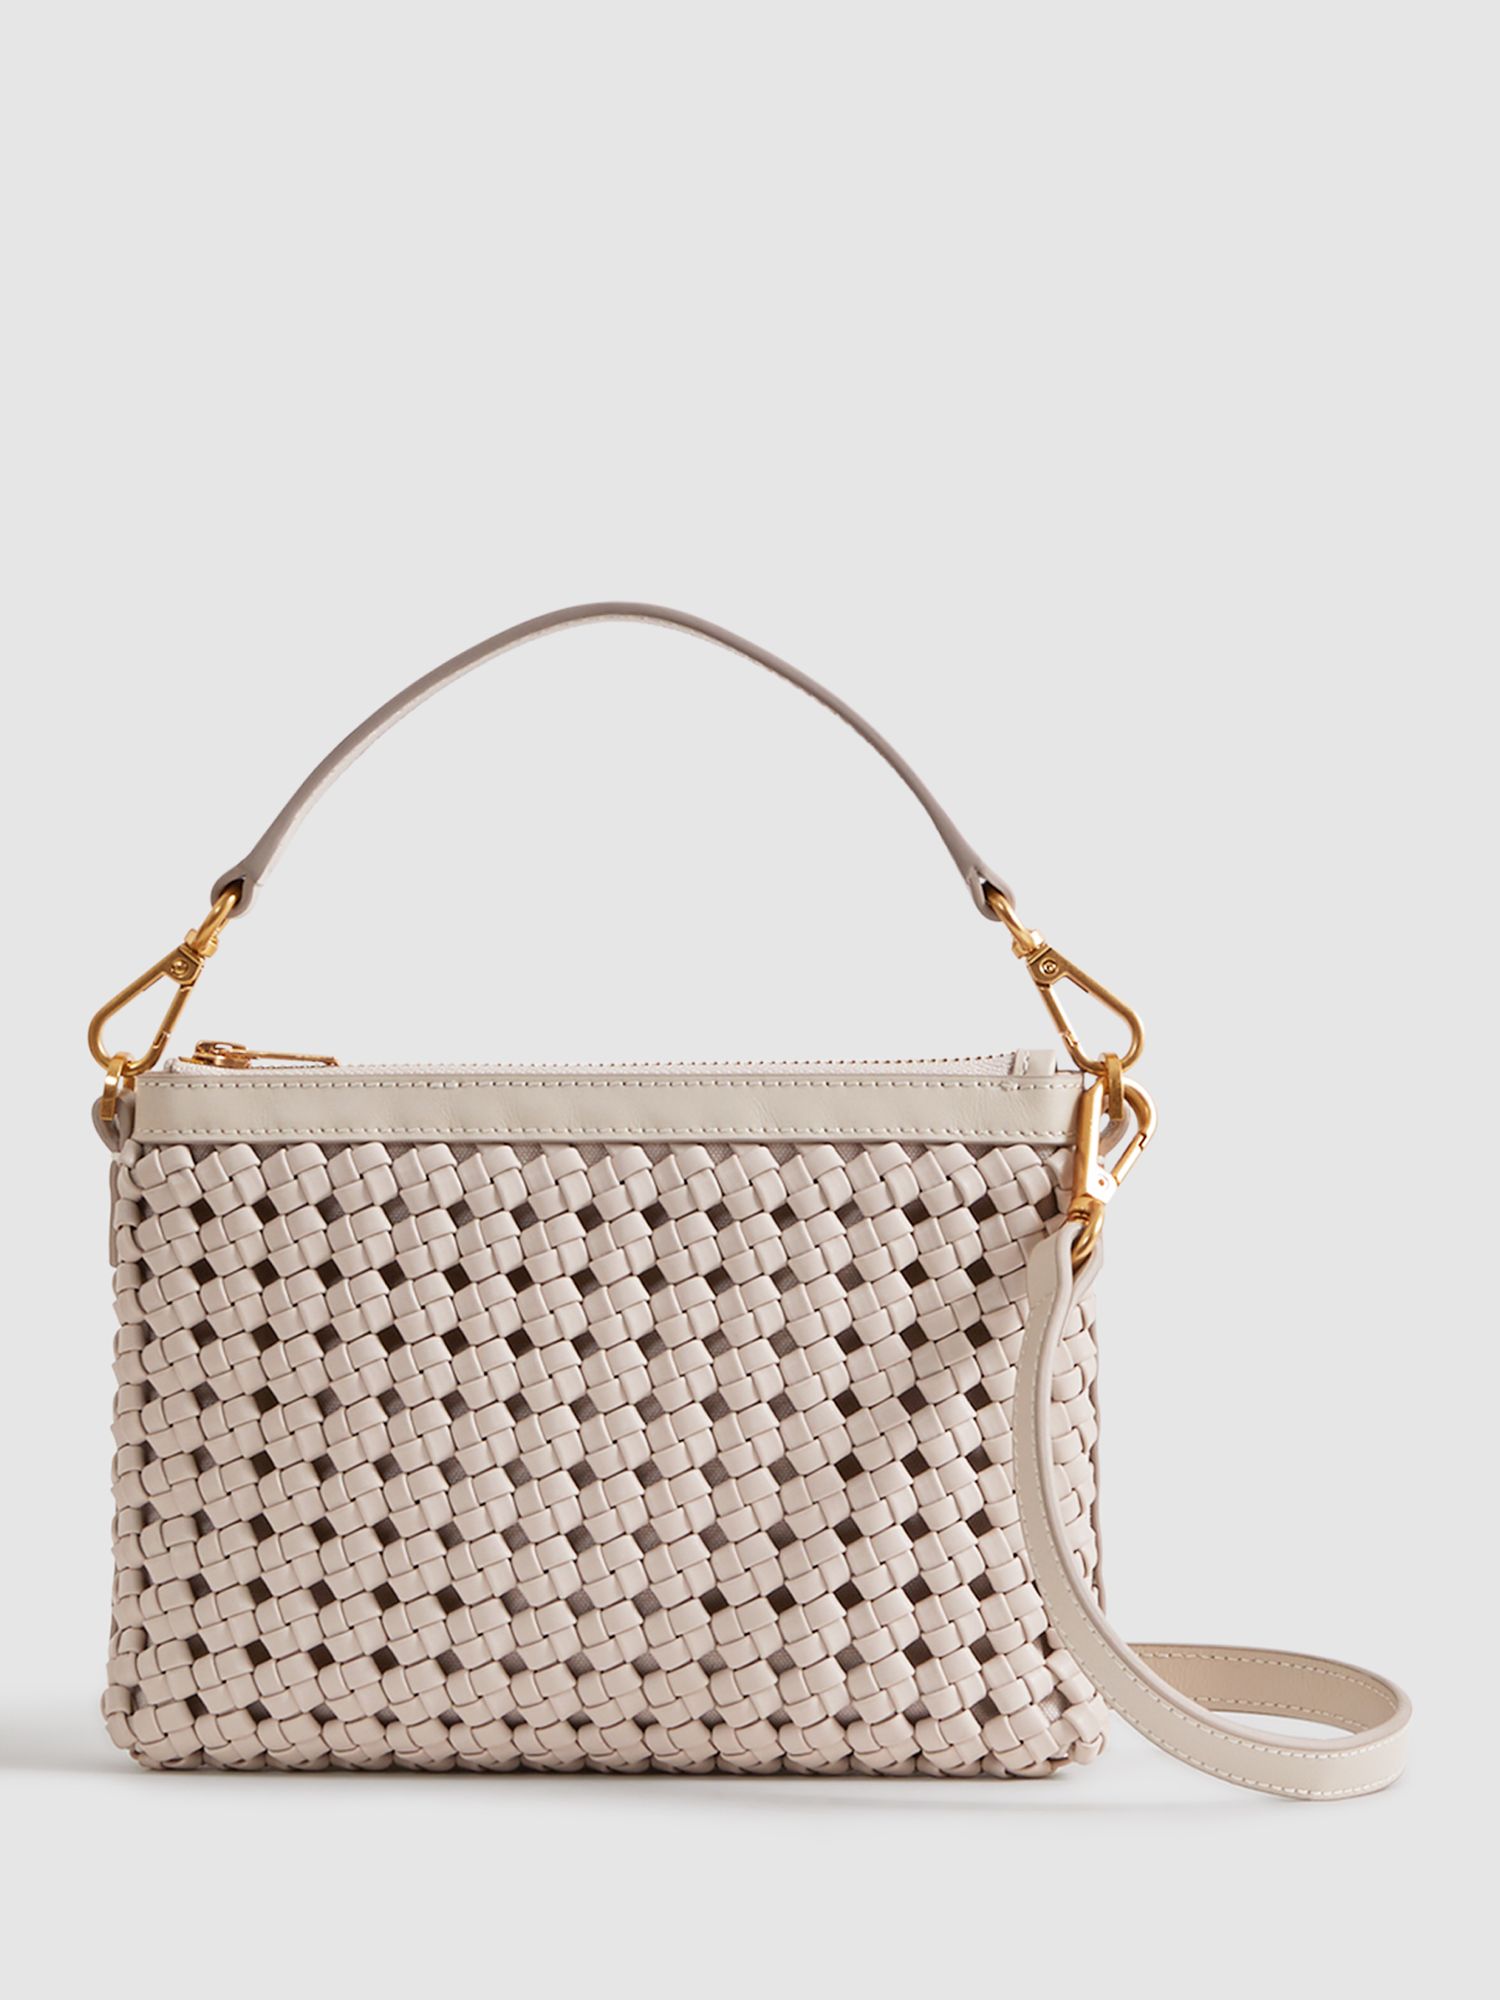 Reiss Brompton Woven Leather Shoulder Bag, Stone, One Size